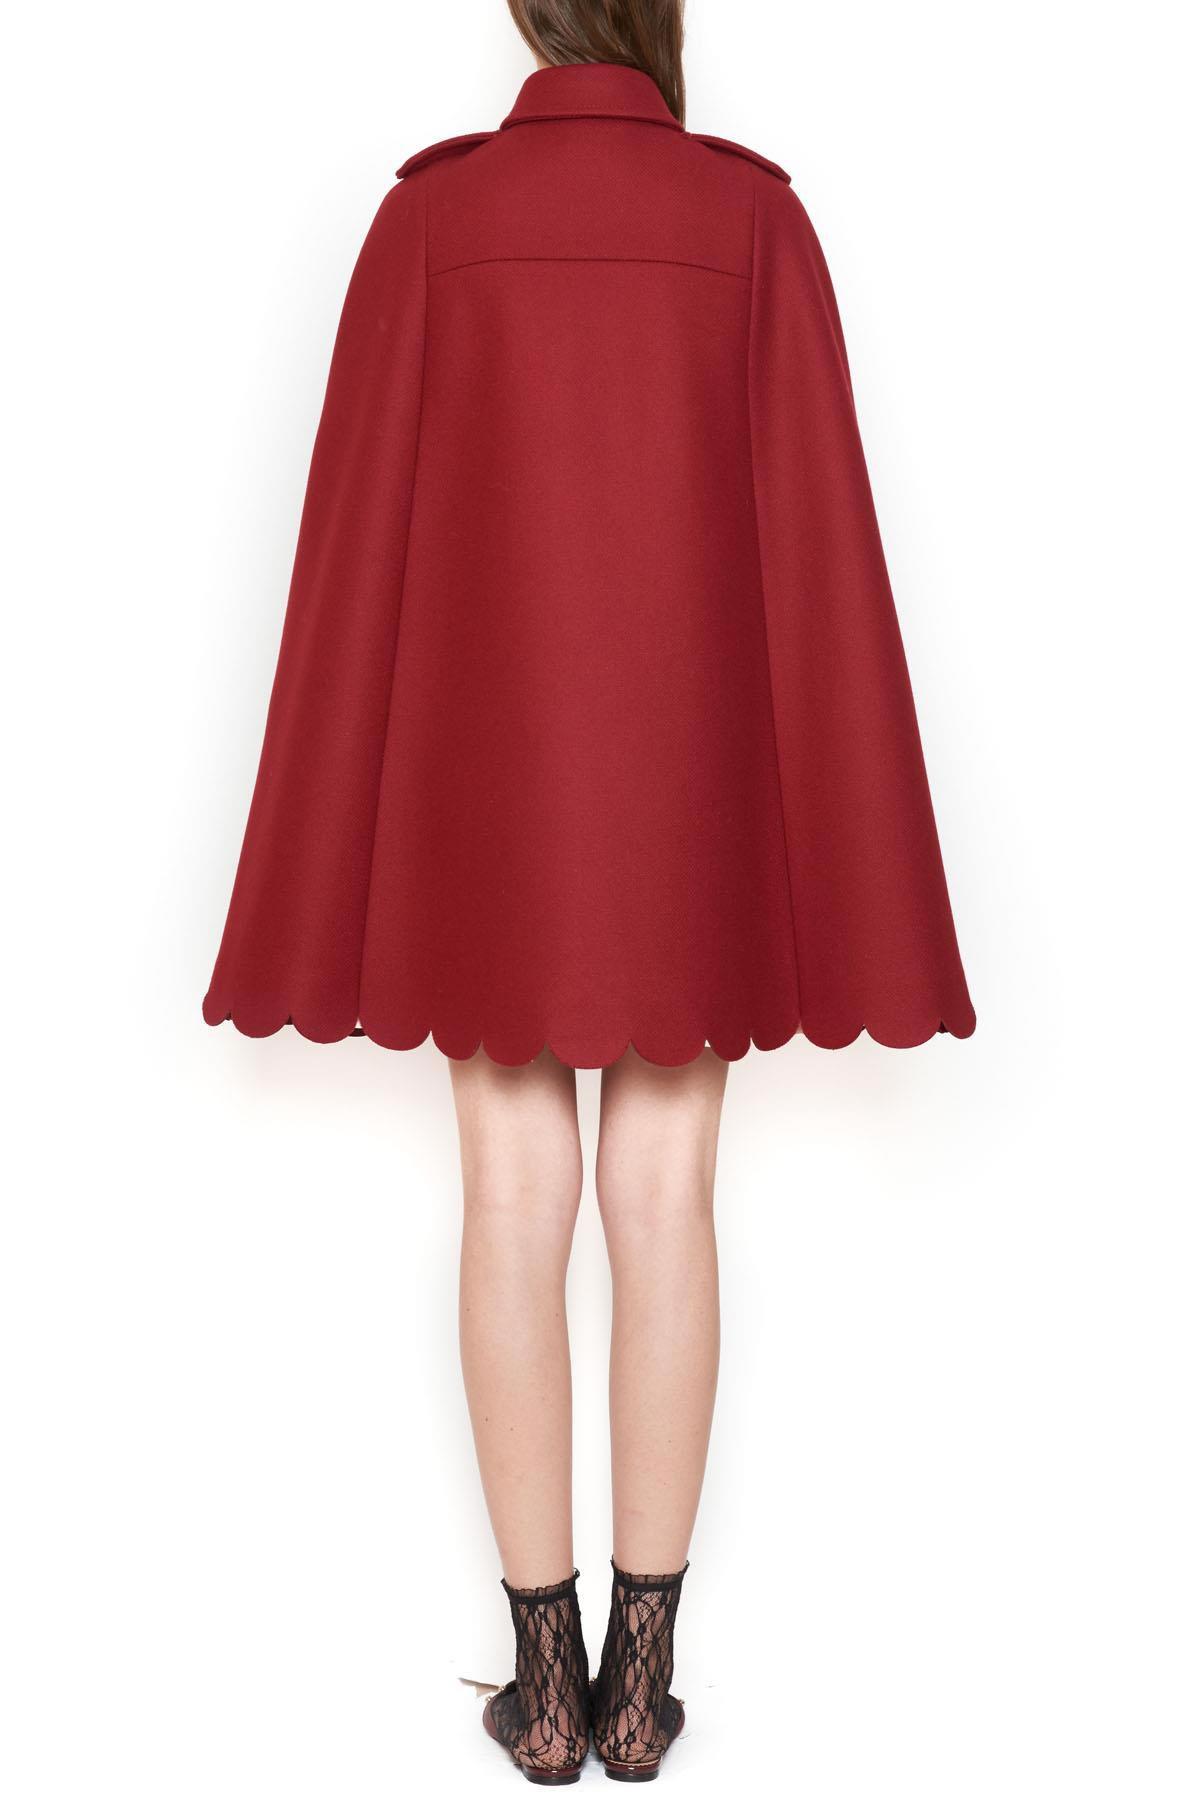 Lyst - RED Valentino Scalopped Cape in Red